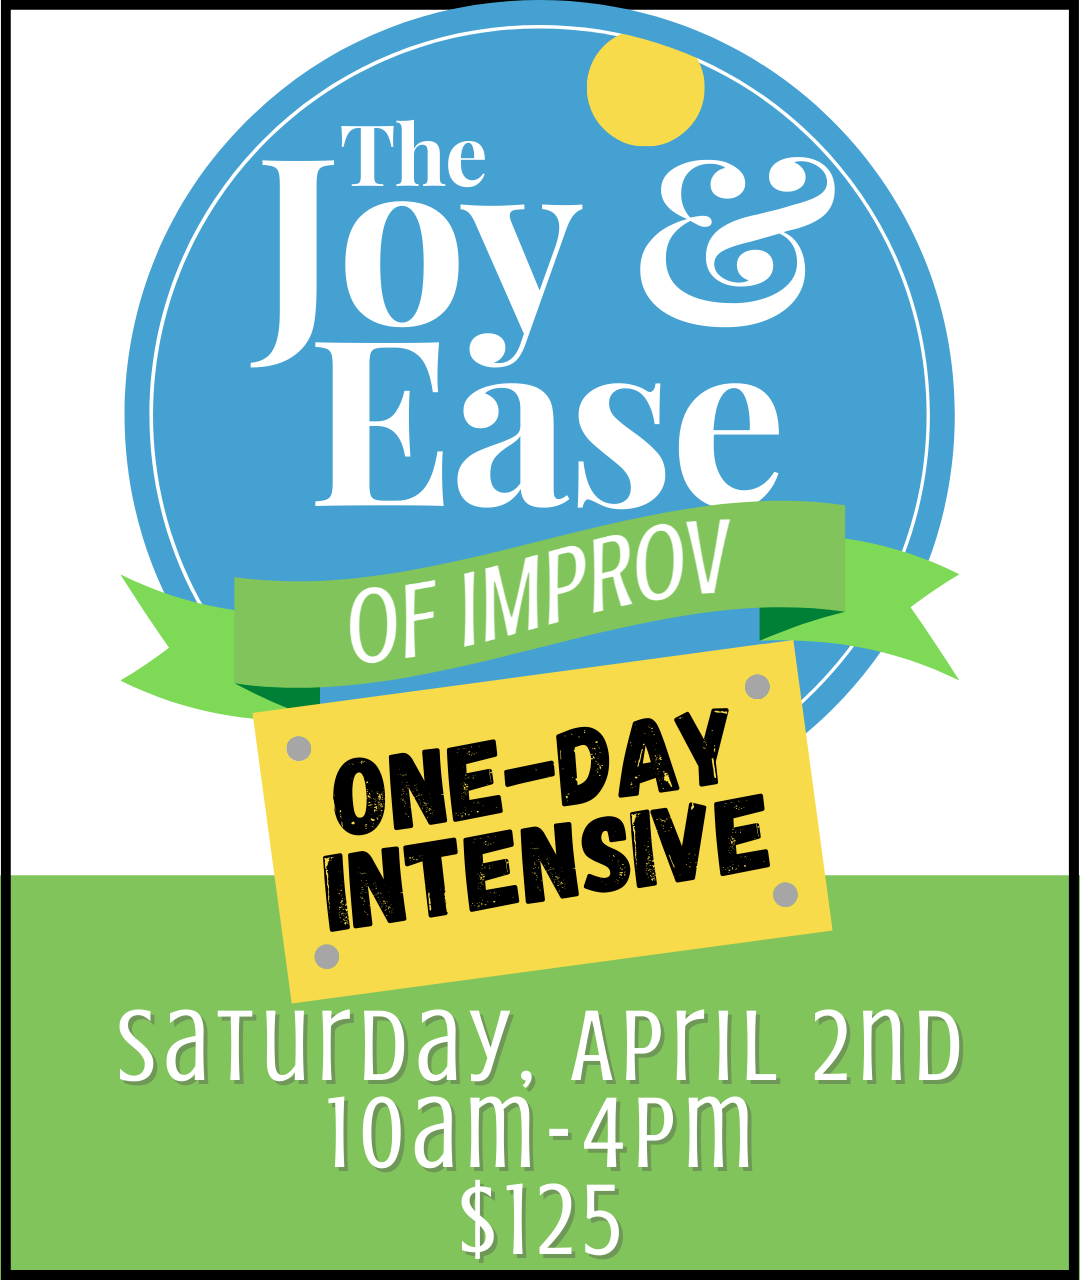 The Joy & Ease of Improv: One-Day Intensive